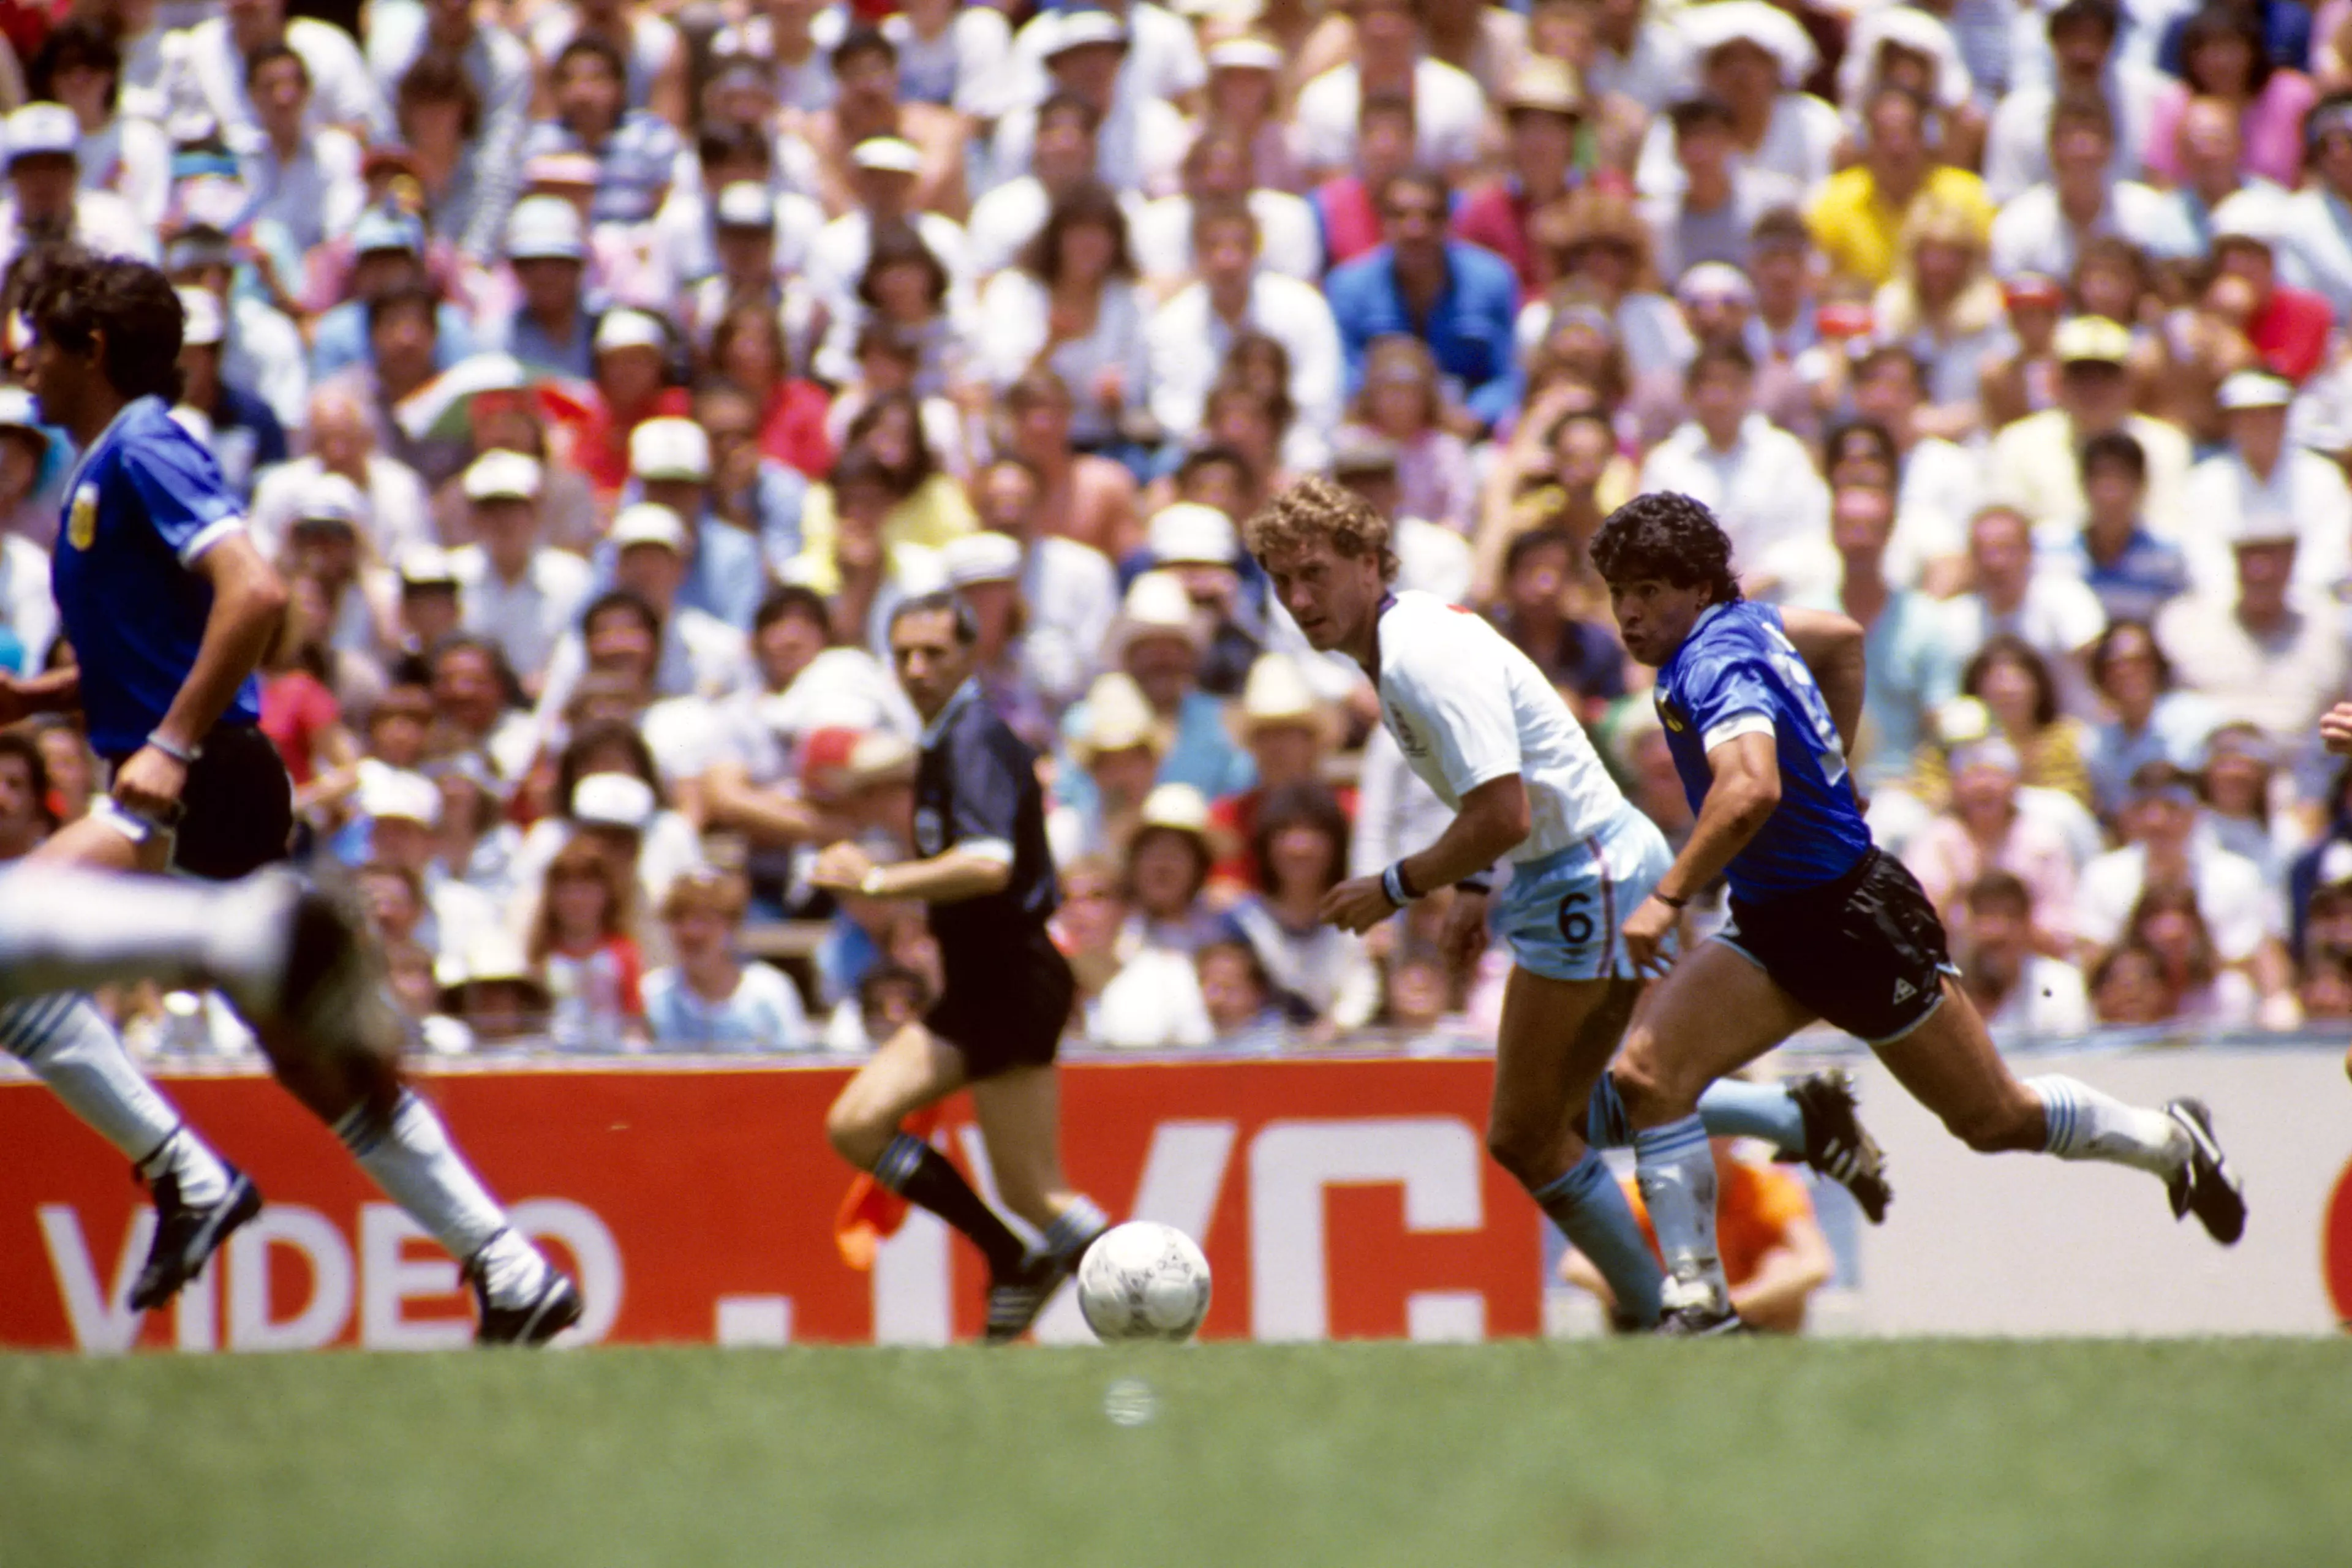 Maradona on the way to scoring 'that' goal, no not THAT one. Image: PA Images.